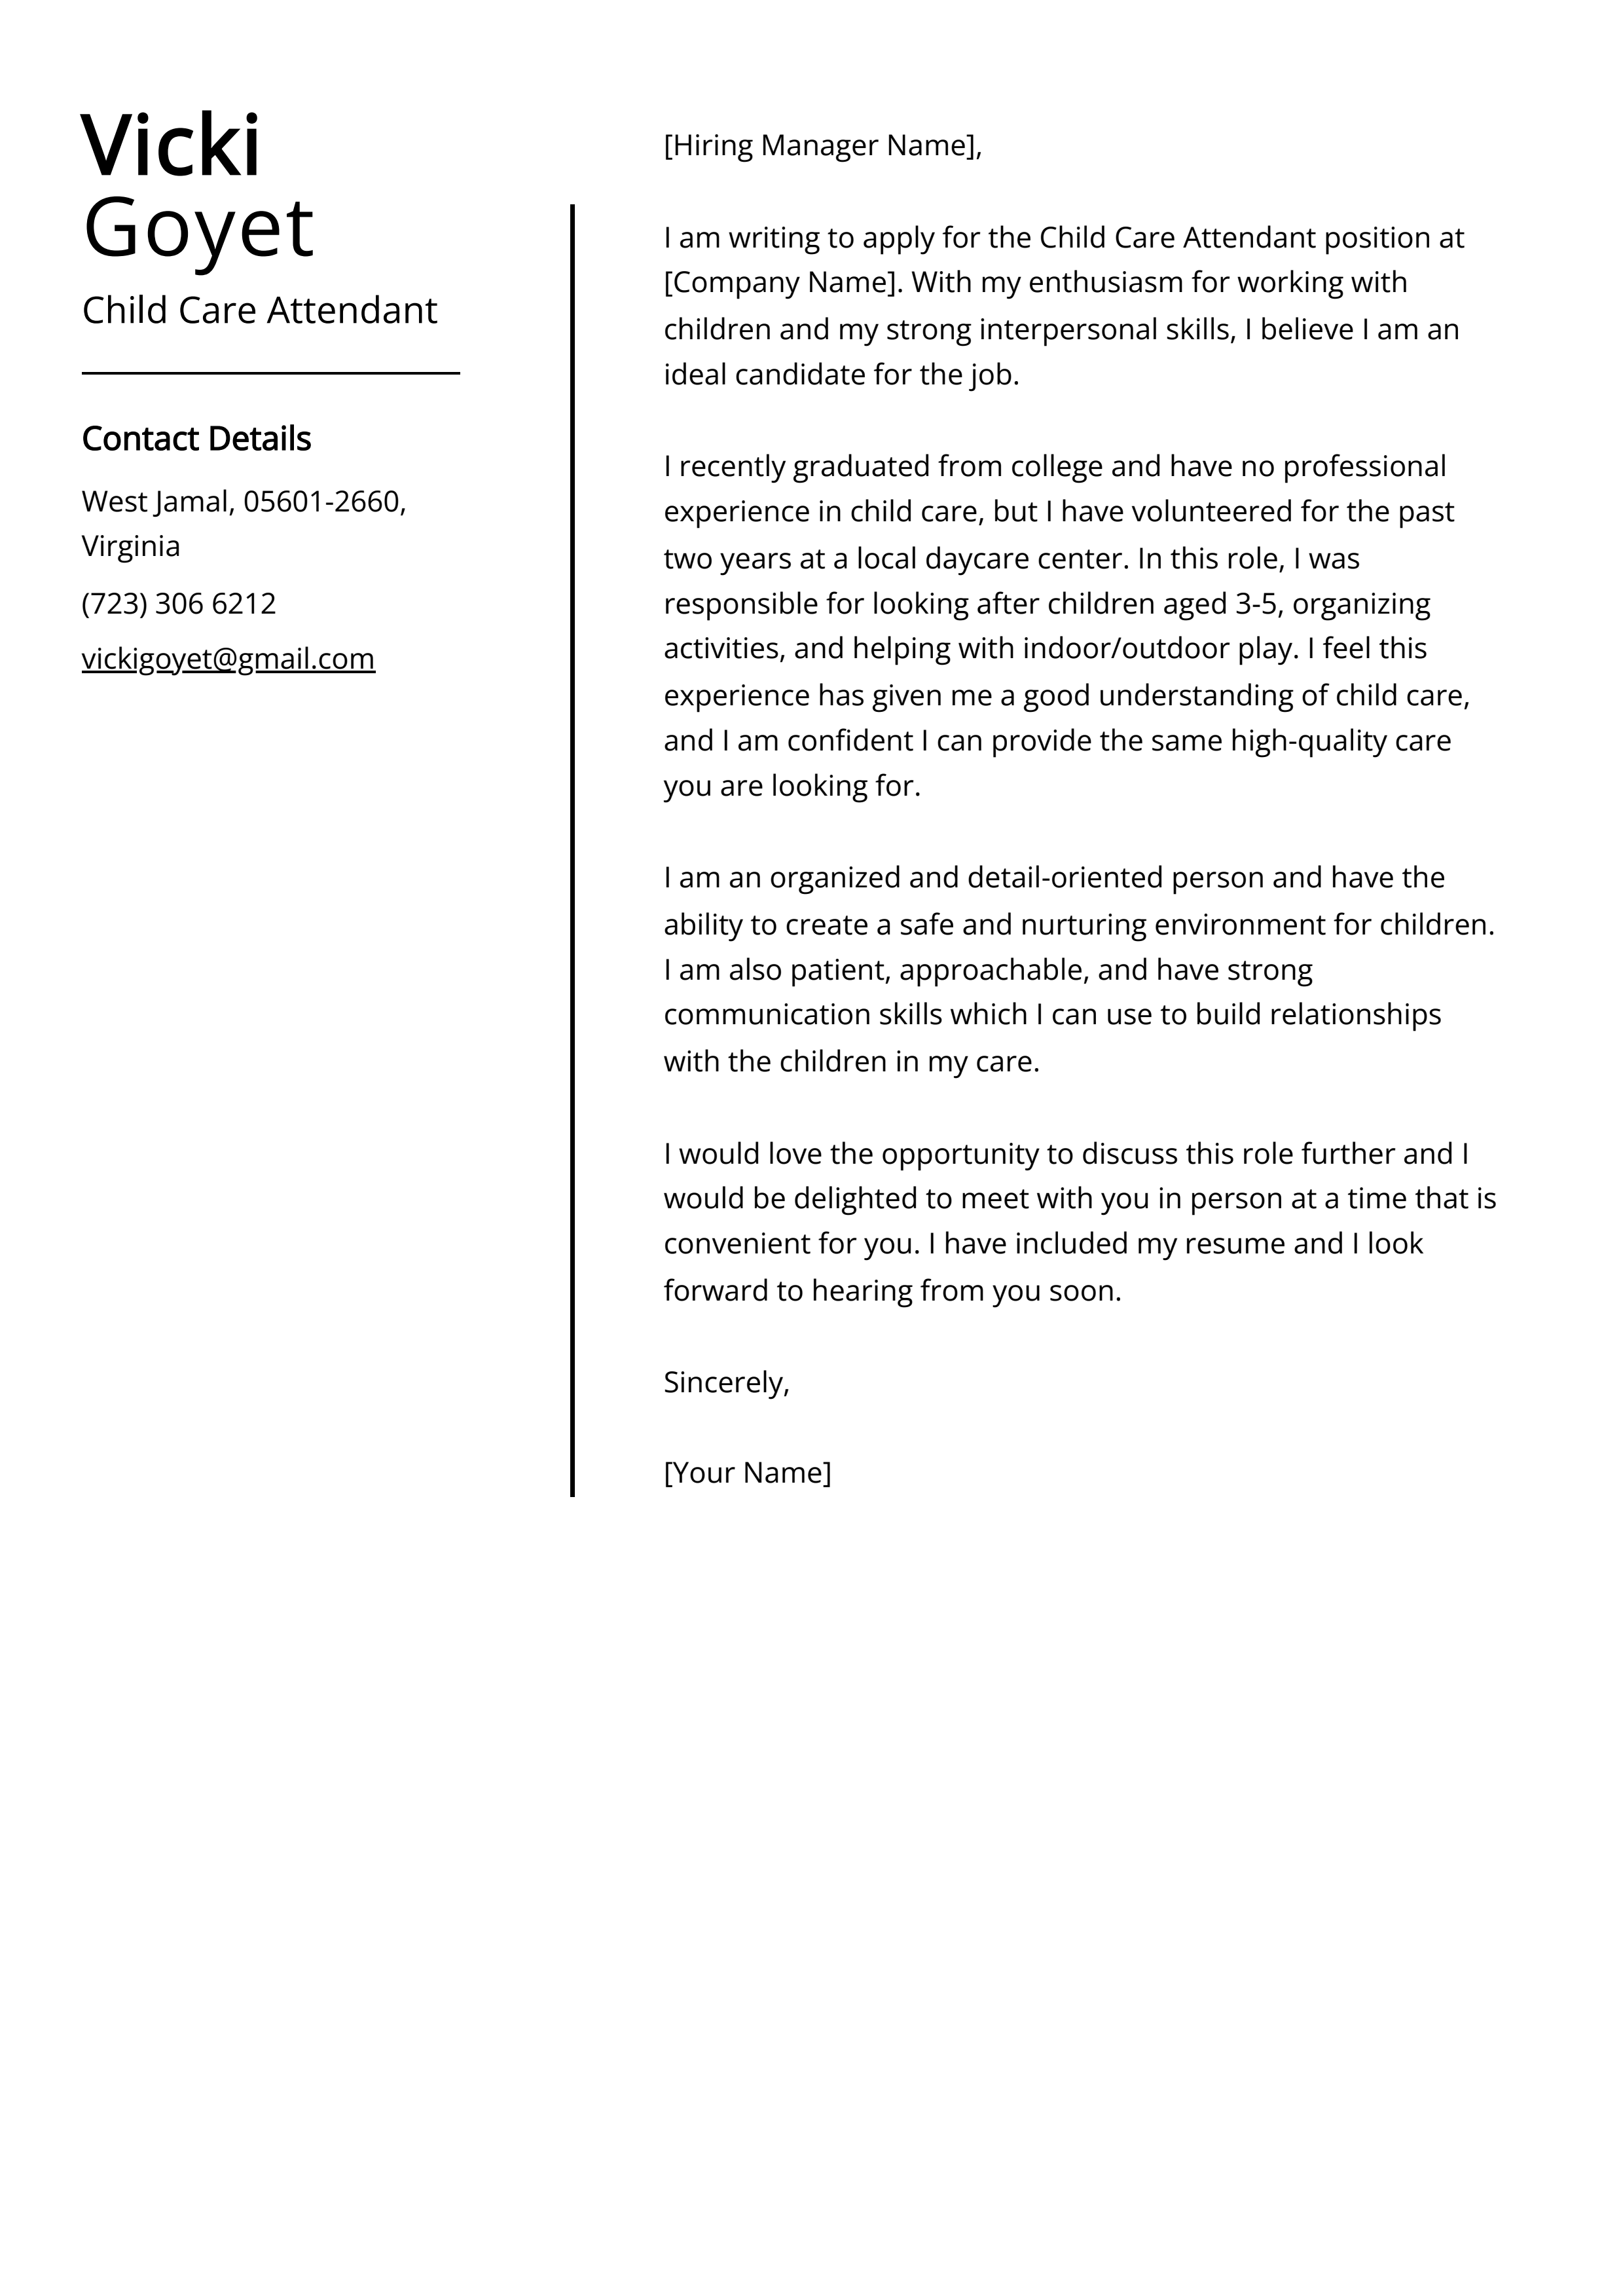 Child Care Attendant Cover Letter Example